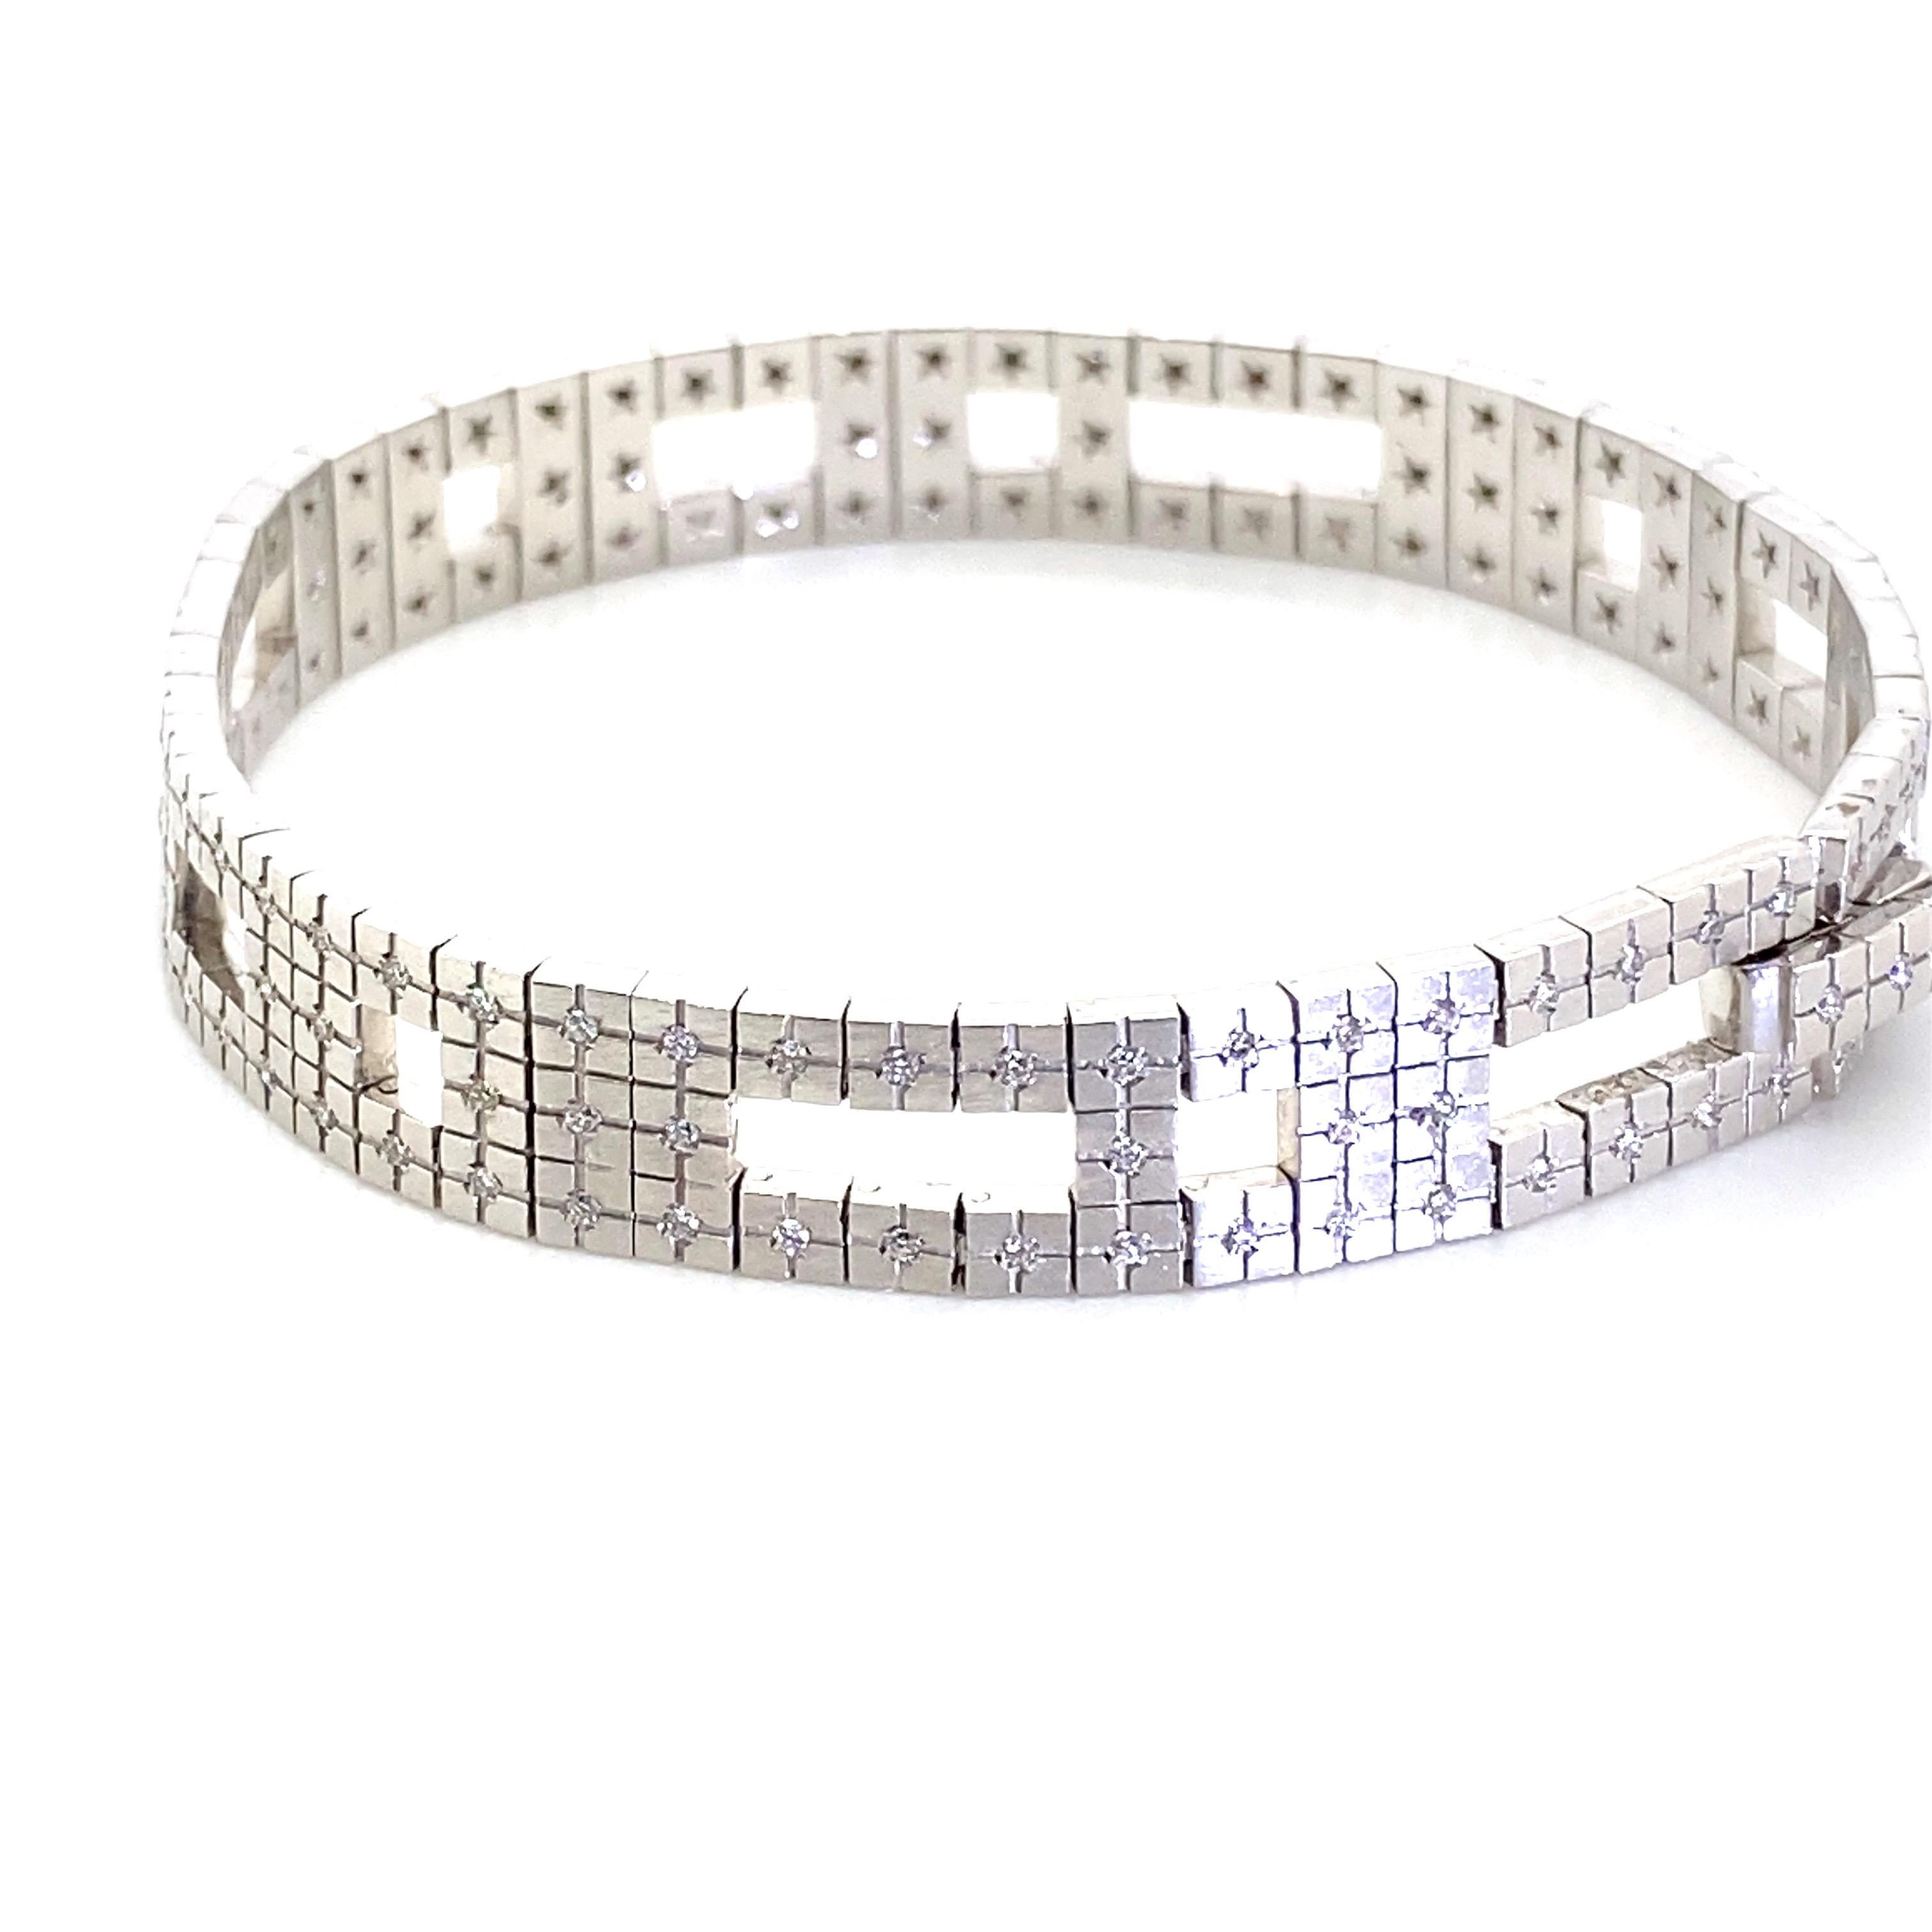 H Stern, the Brazilian jewellery designer that creates magic. Every piece from his collection becomes sought after and collected, and this Metropolis bracelet is no exception. It's understated, elegant and so wearable. 
Crafted in 18k white gold,